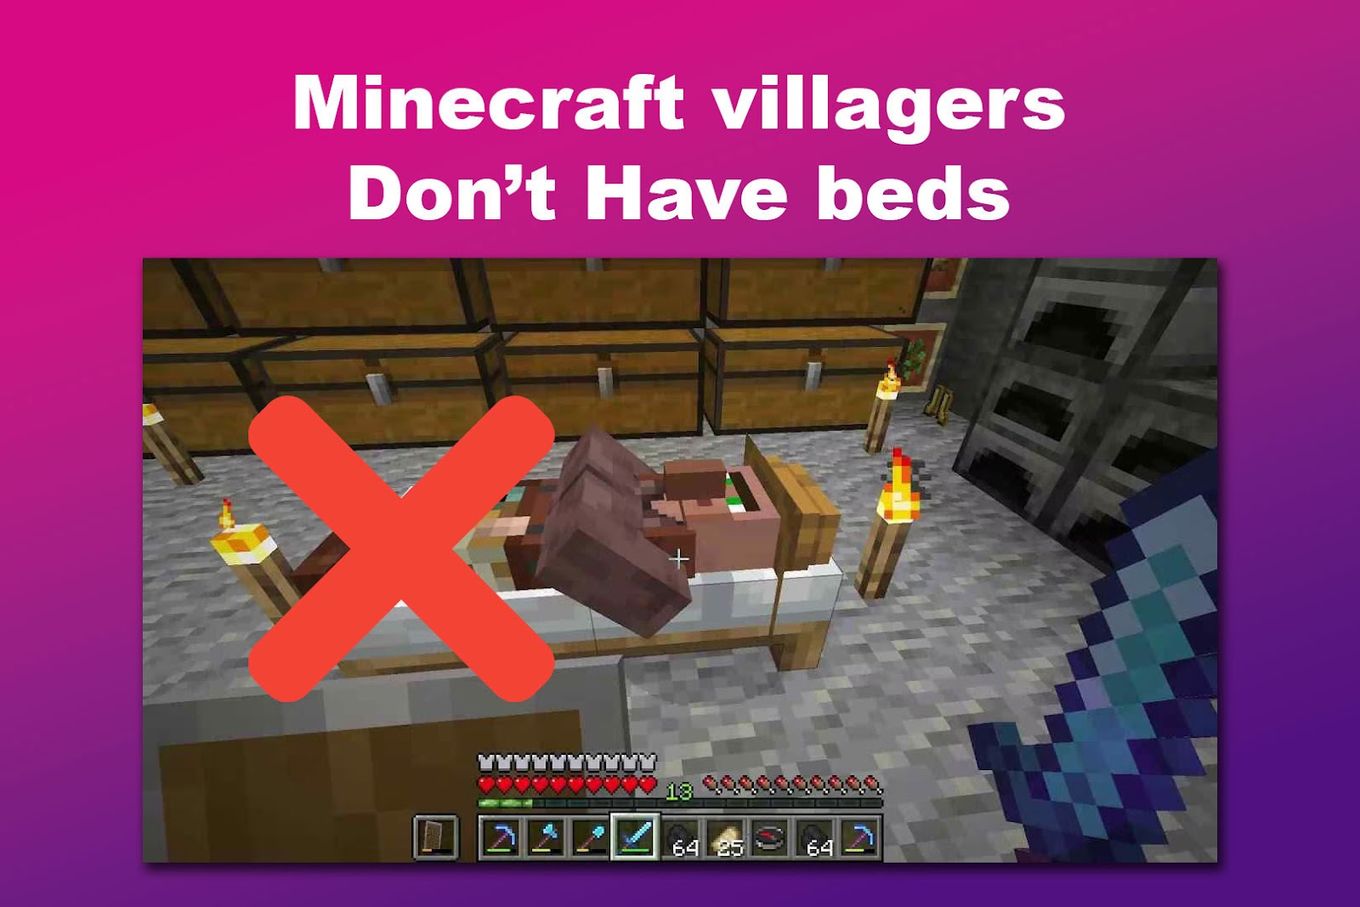 Minecraft villagers Don't Have beds